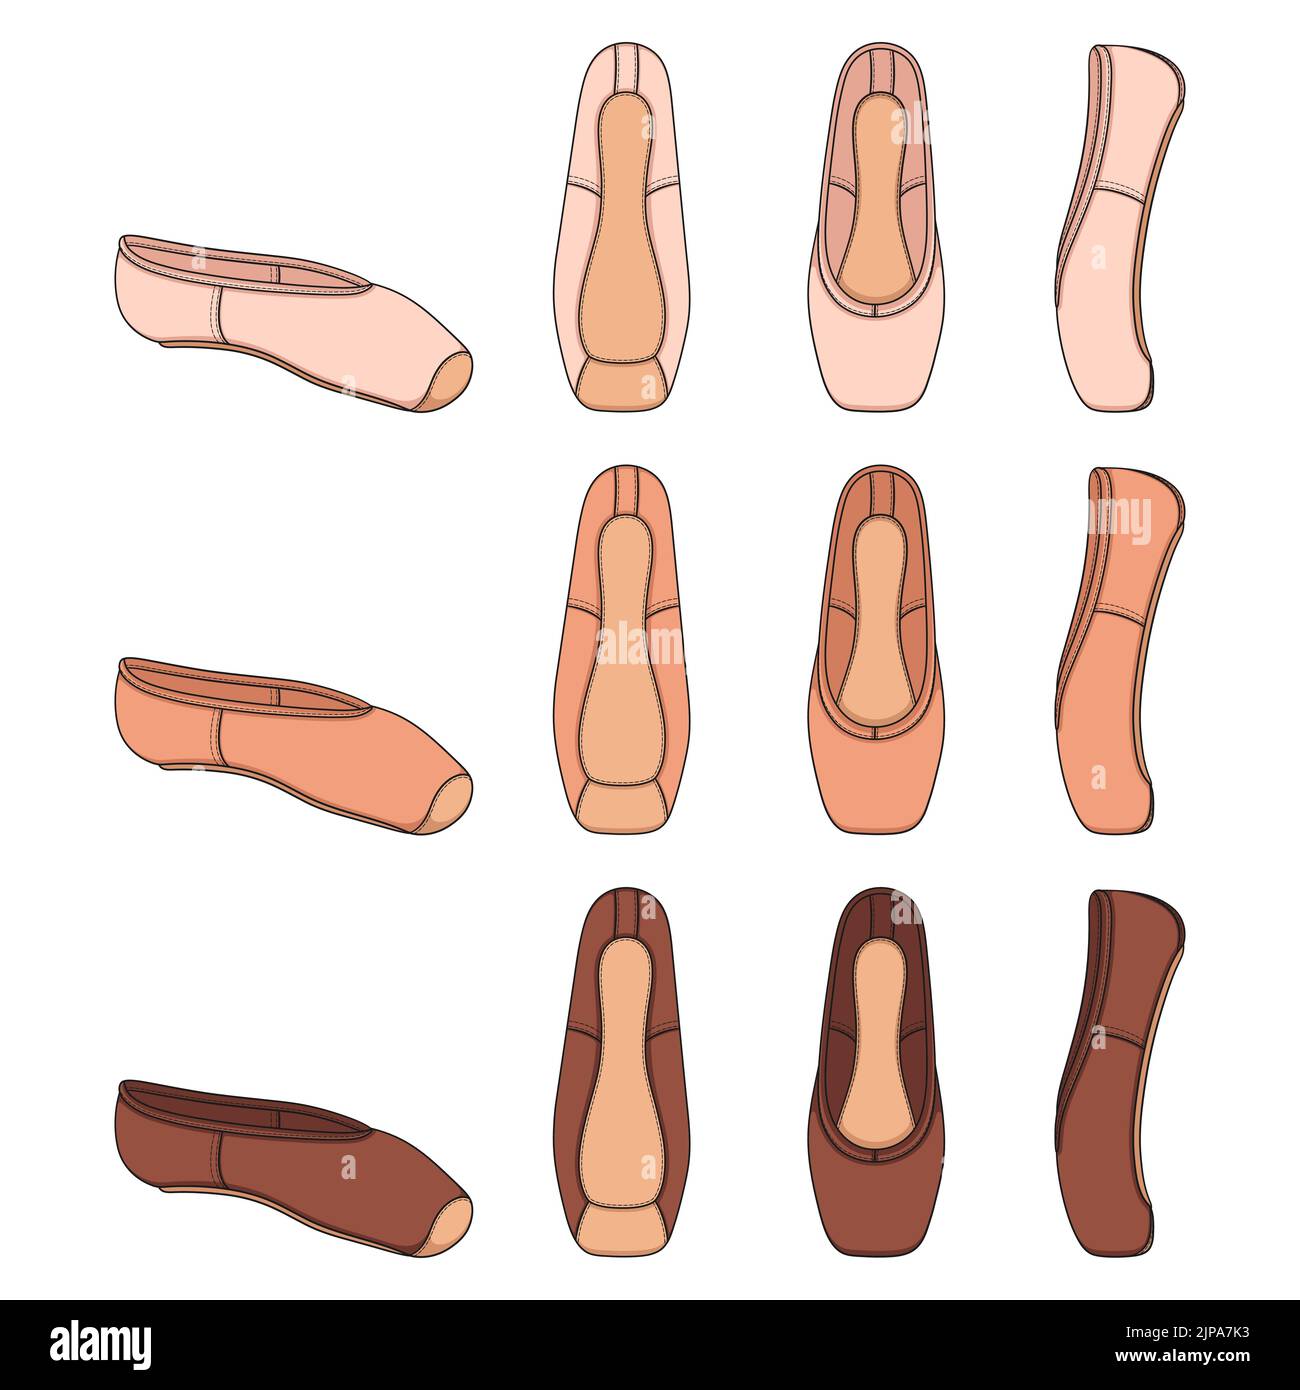 Set of color illustrations with pointe shoes, ballet shoes. Isolated vector objects on a white background. Stock Vector